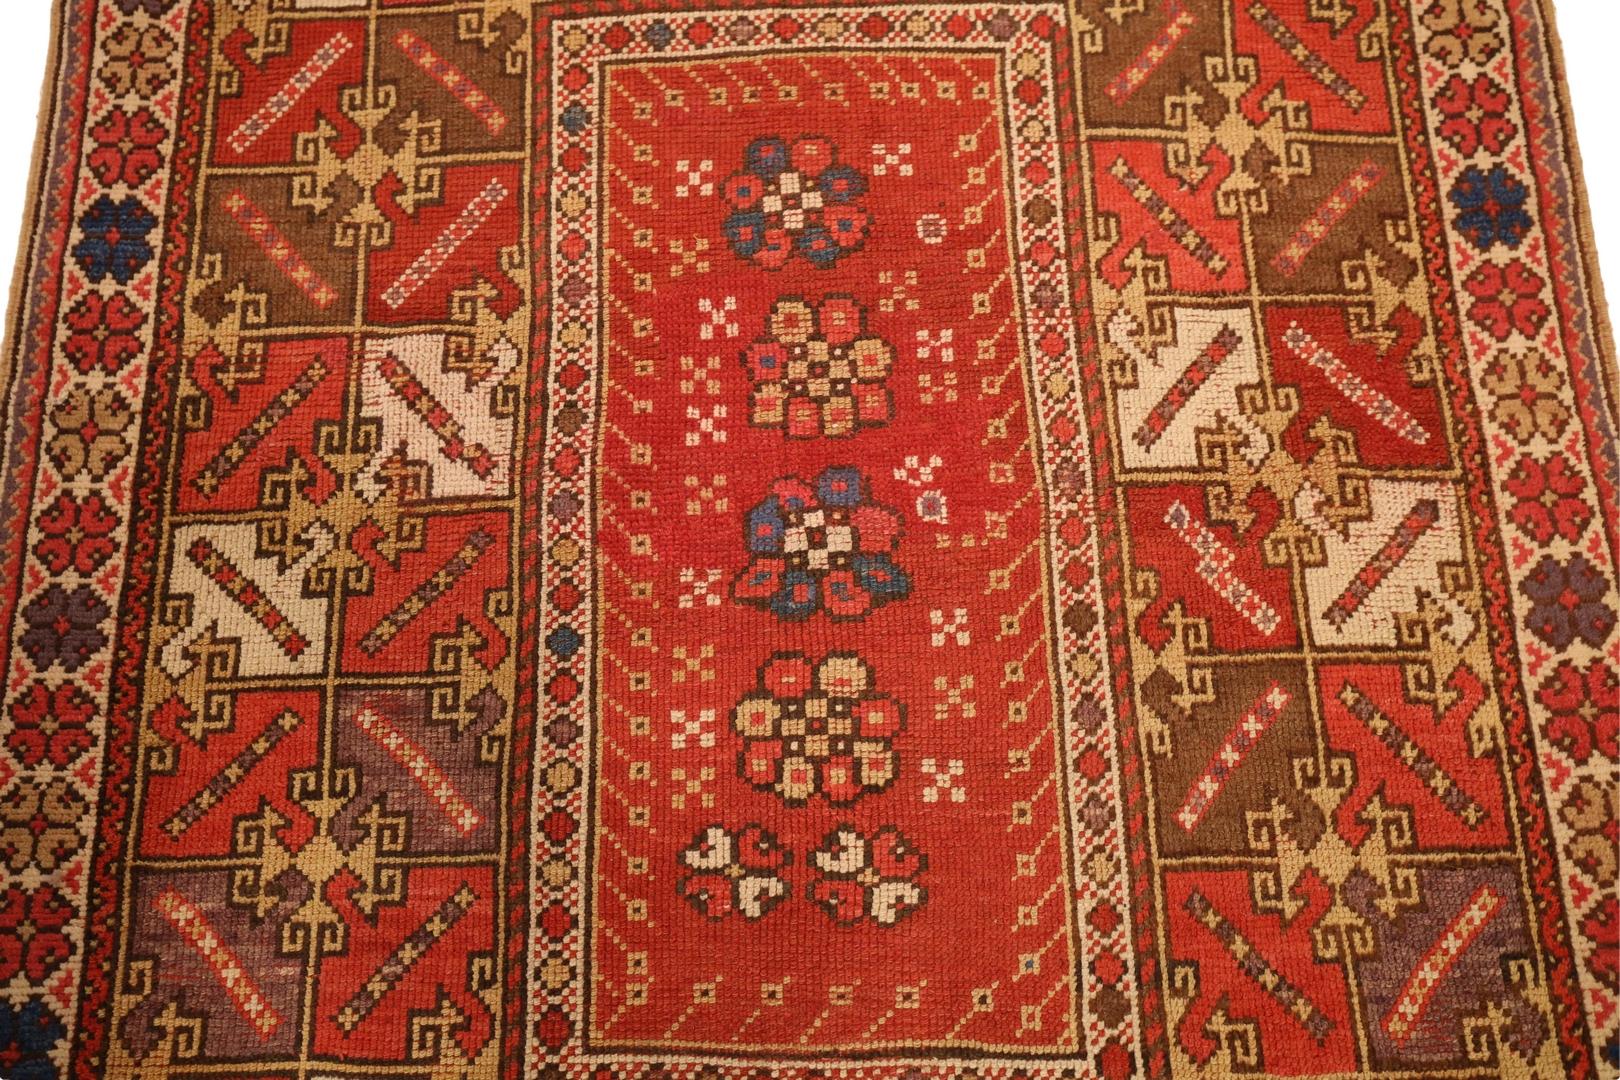 This antique Turkish rug is a true masterpiece that captures the essence of traditional weaving techniques and the rich cultural heritage of the region. The rug's beautiful color red has aged gracefully over time, giving it a unique and charming